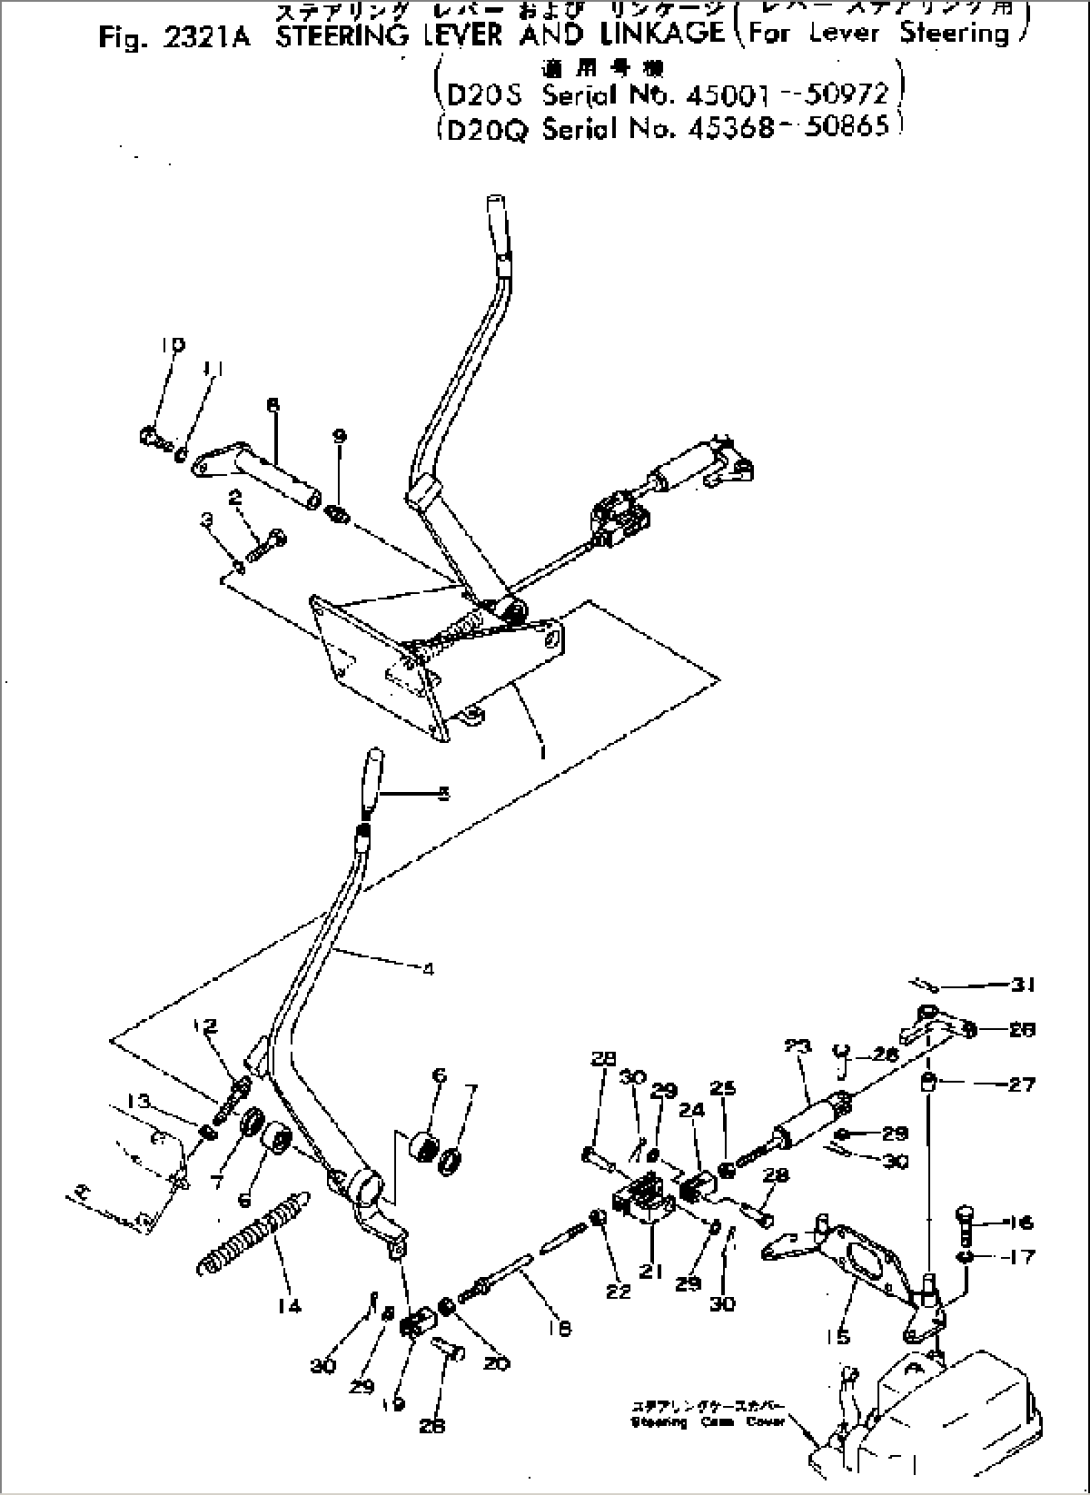 STEERING LEVER AND LINKAGE (FOR LEVER STEERING)(#50001-50865)